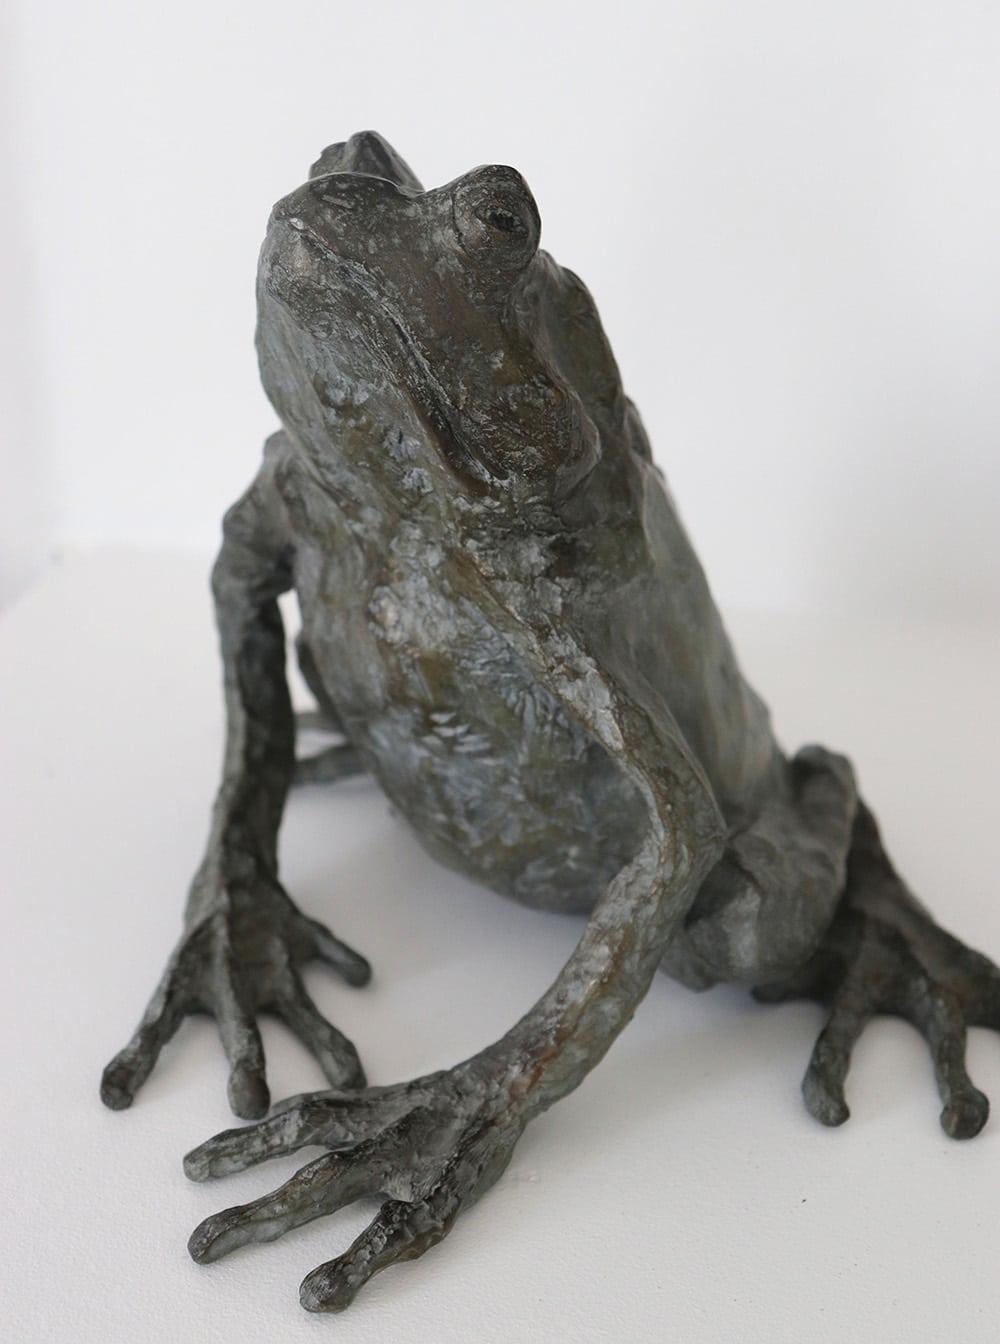 Magic Frog by Chésade - Bronze sculpture, animal art, expressionism, realism For Sale 7